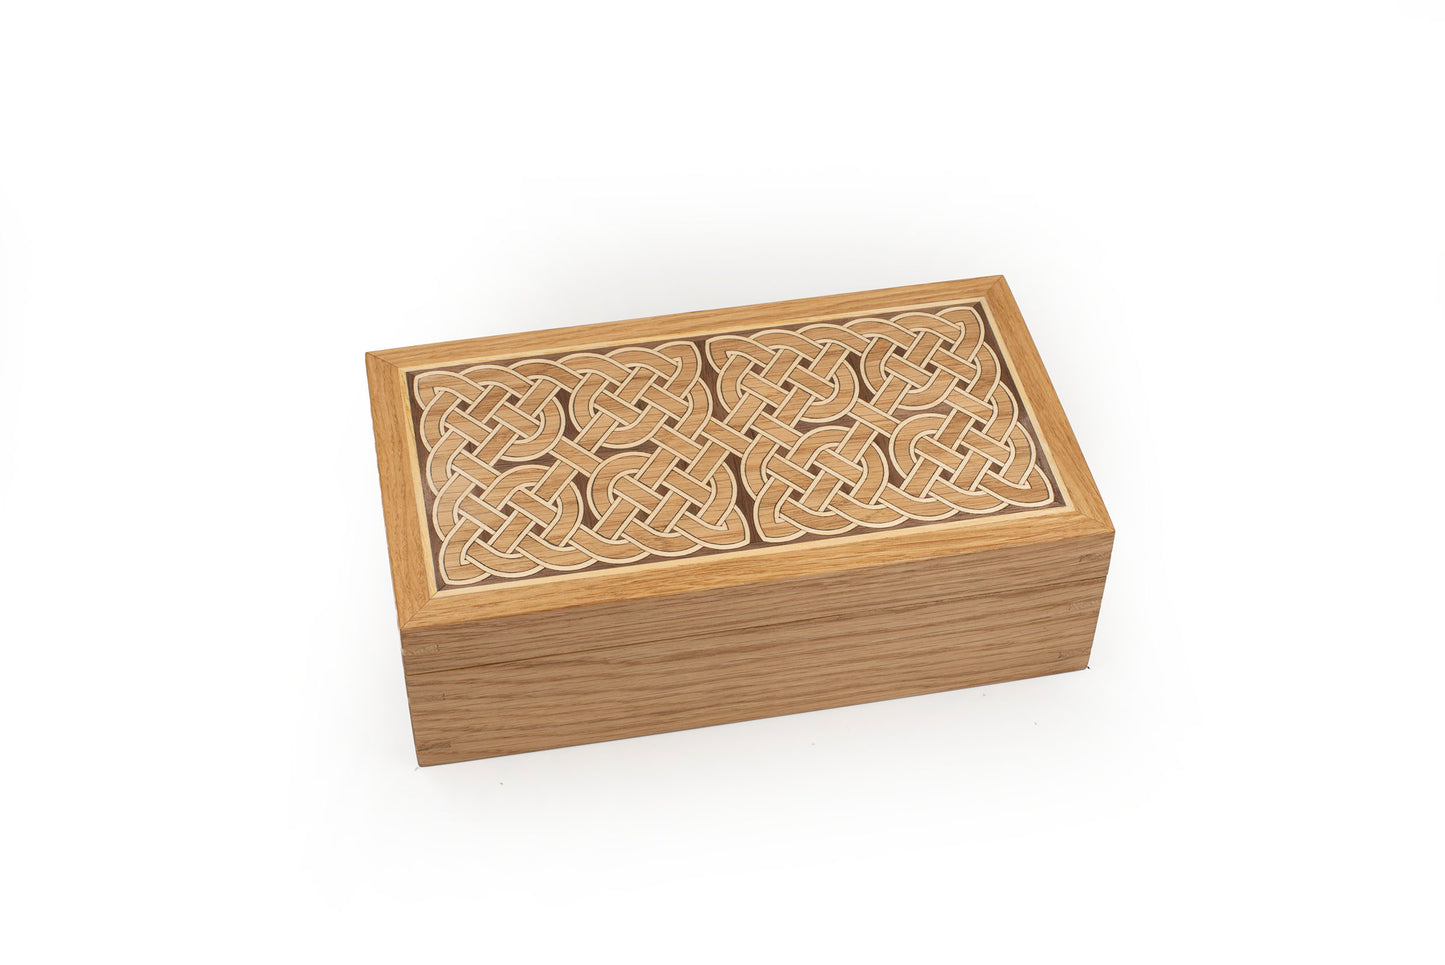 Trinket Box, Handcrafted of Solid Oak with Celtic Pictish Marquetry inlays - optional personalised engraving